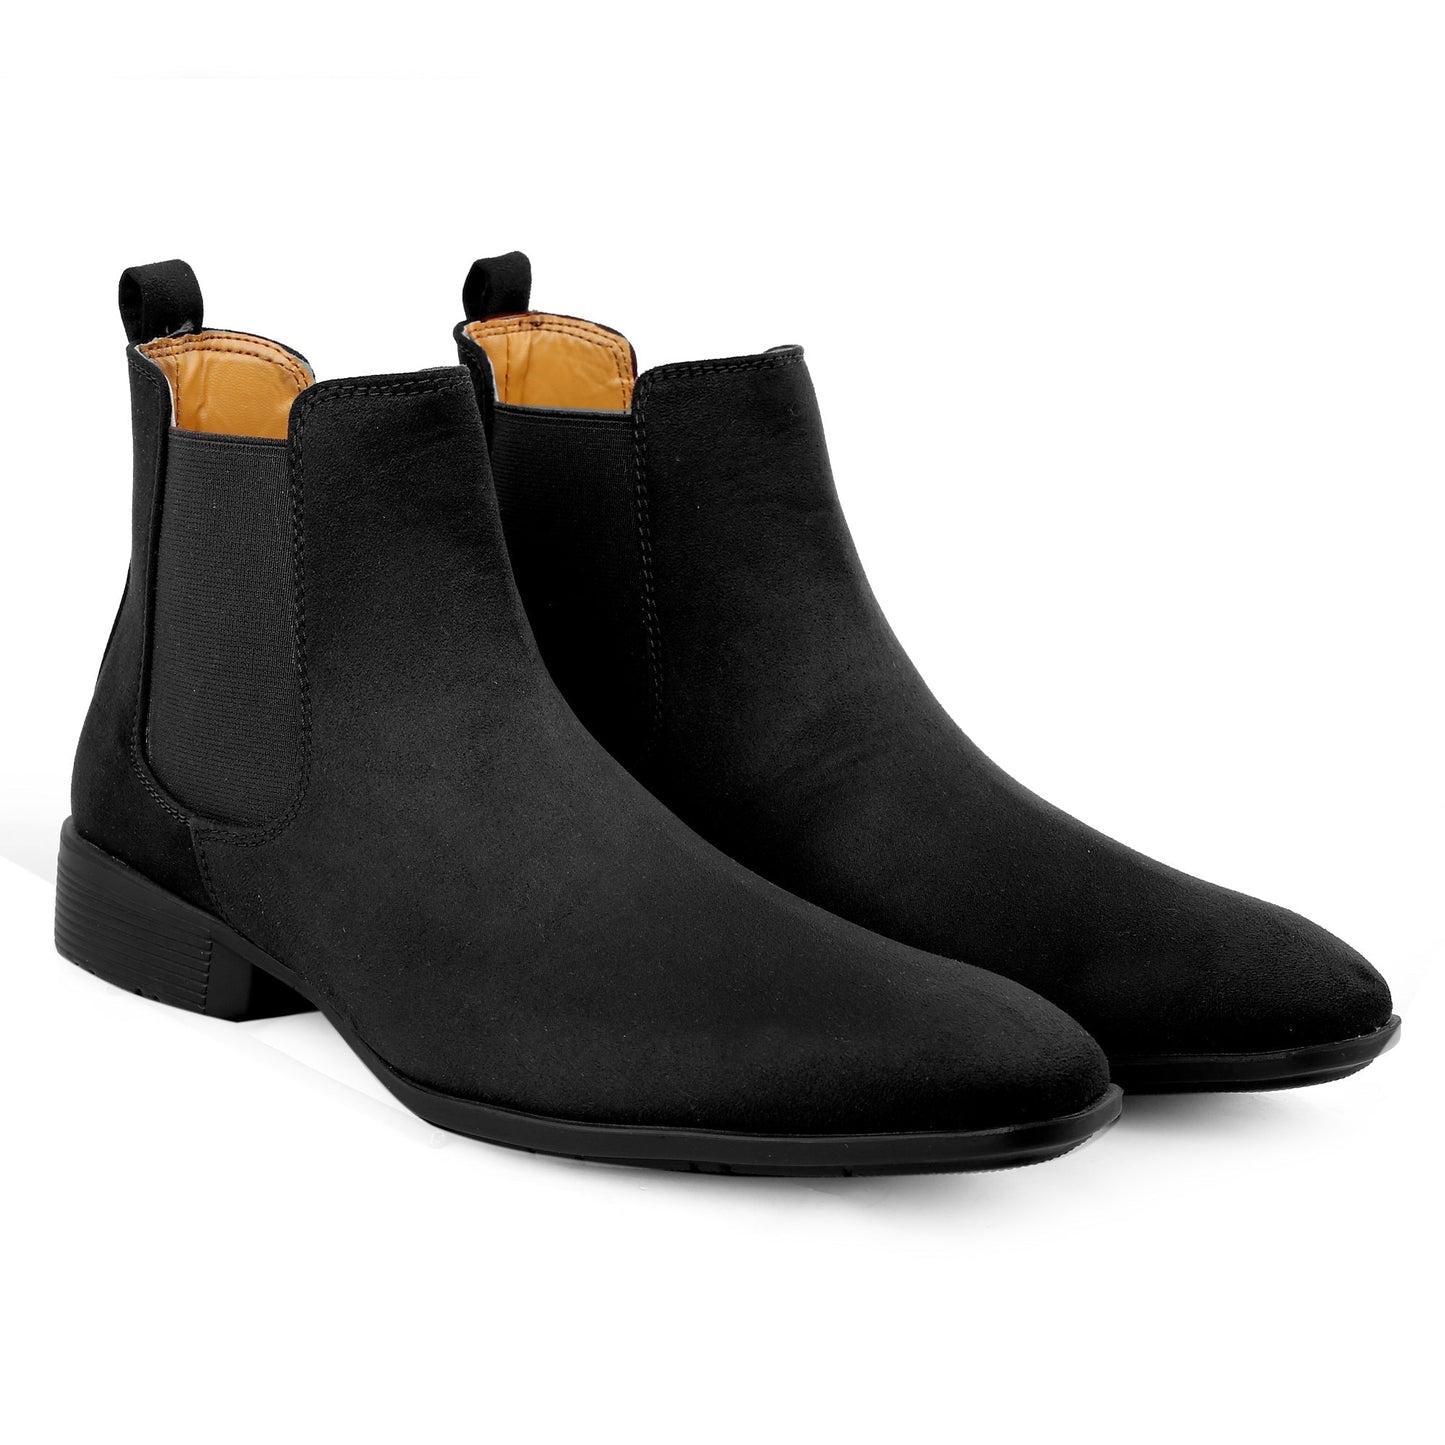 Buy New Stylish Suede Chelsea Boot For Men Party And Casual Wear -JackMarc